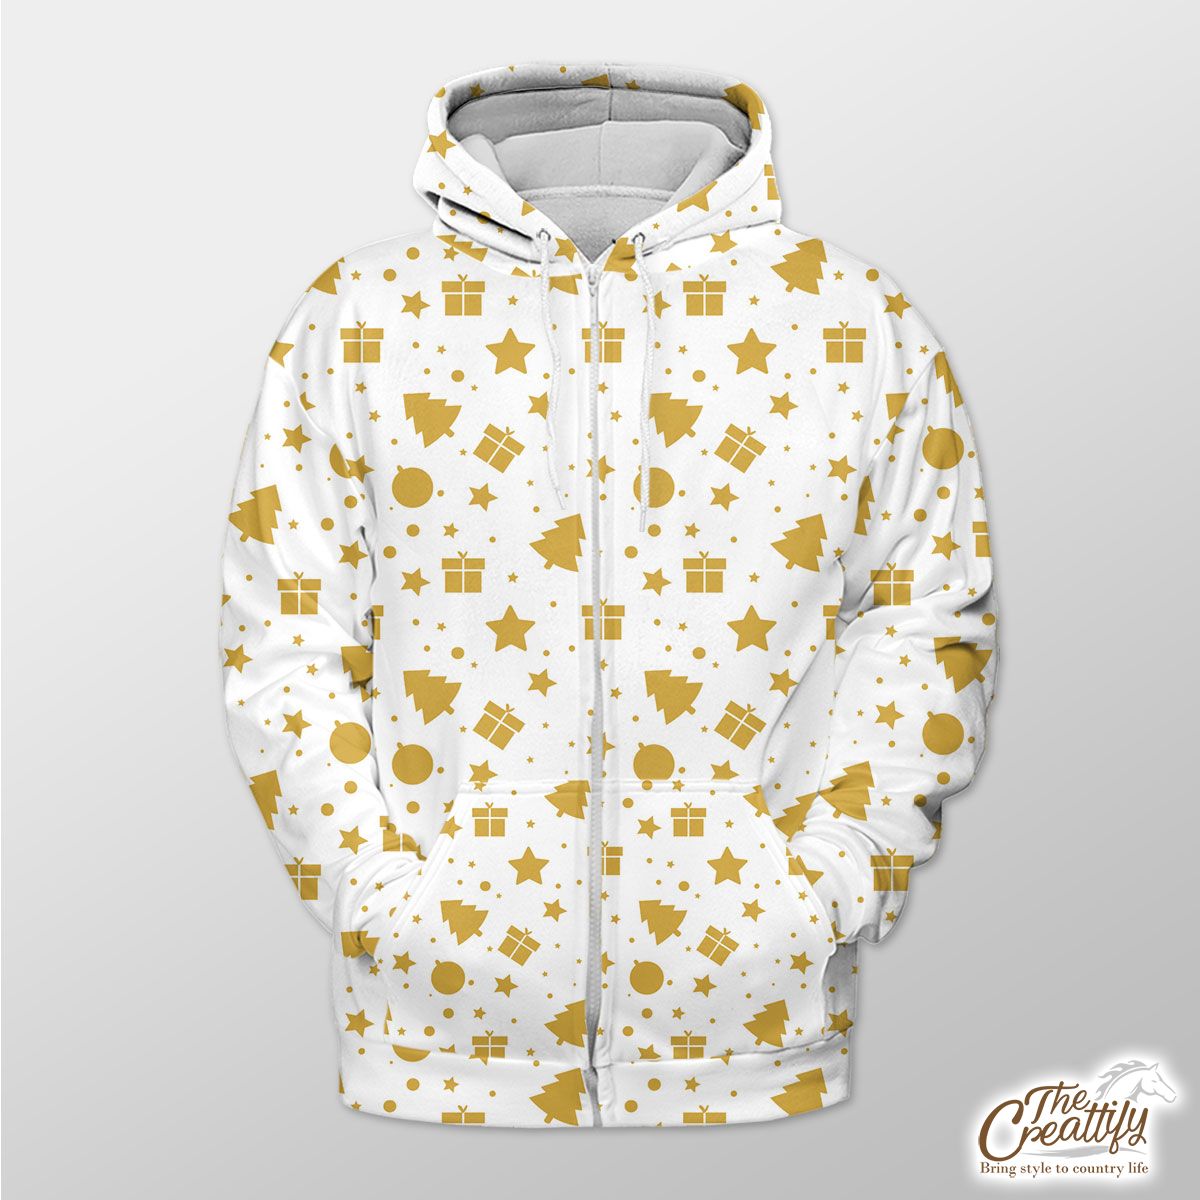 Christmas Gifts, Baudles And Pine Tree Silhouette Filled In Gold Color Pattern Zip Hoodie